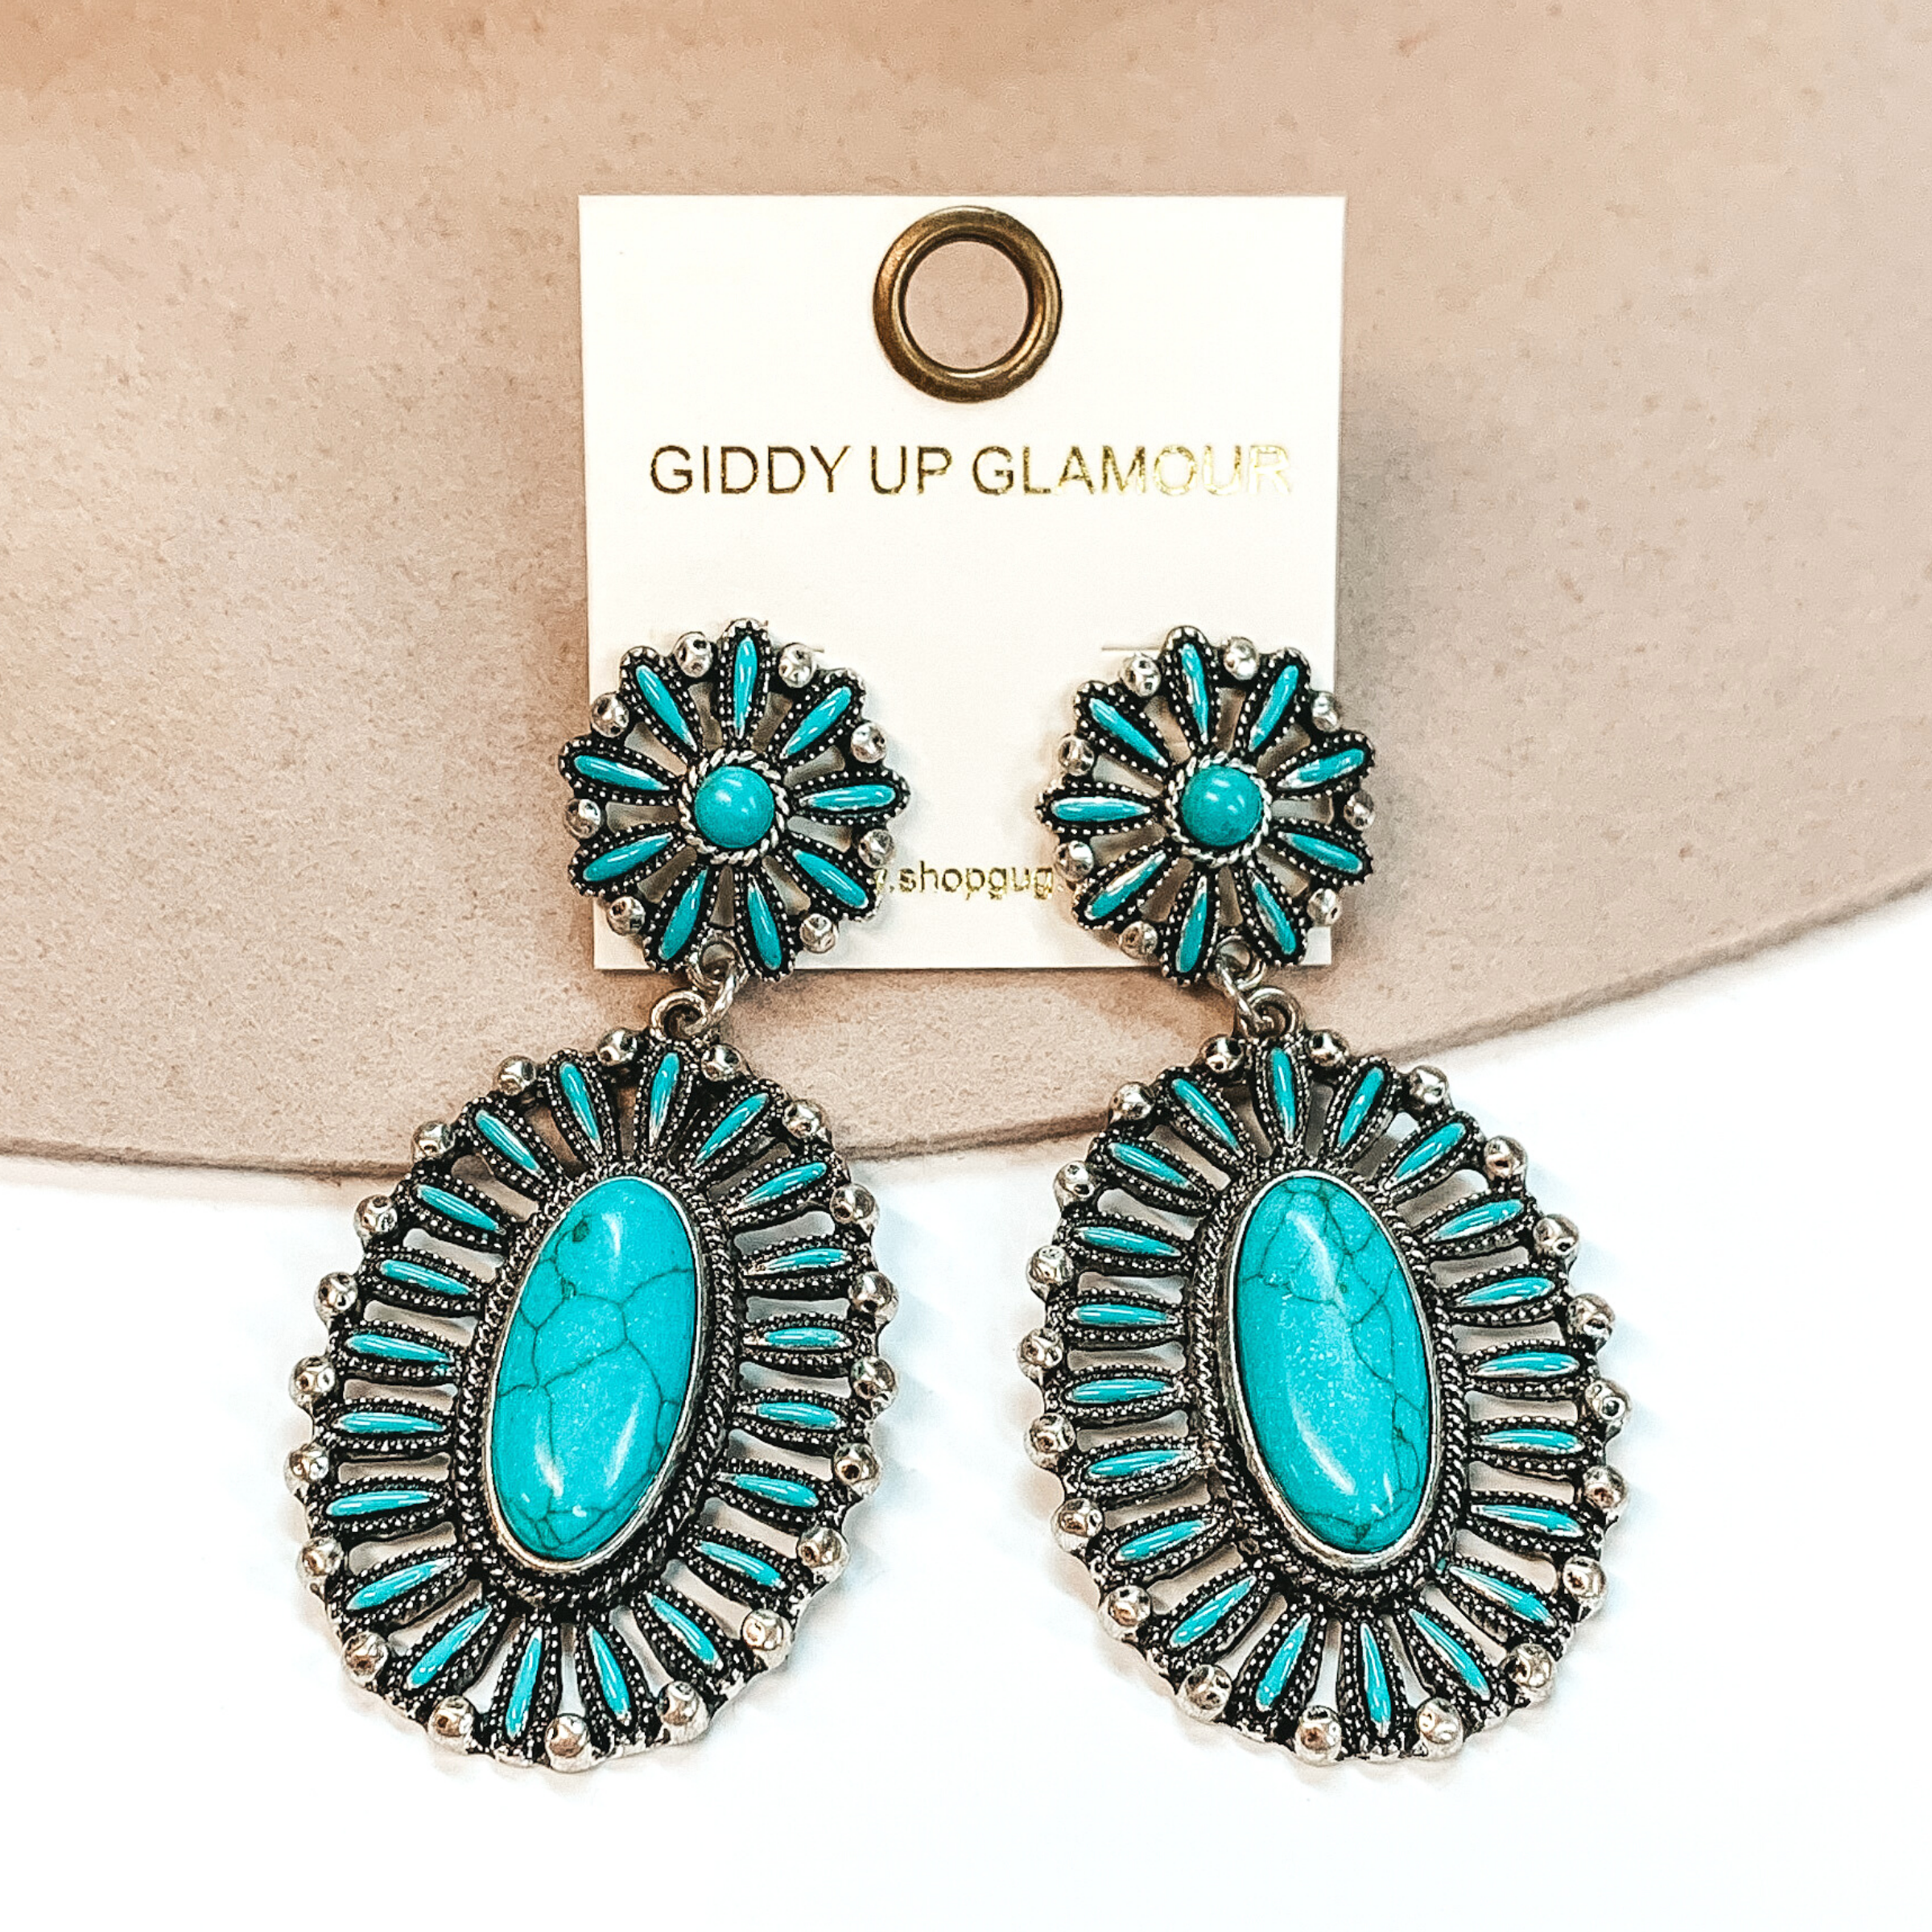 Oval Cluster Drop Earrings with Large Center Stone in Turquoise - Giddy Up Glamour Boutique